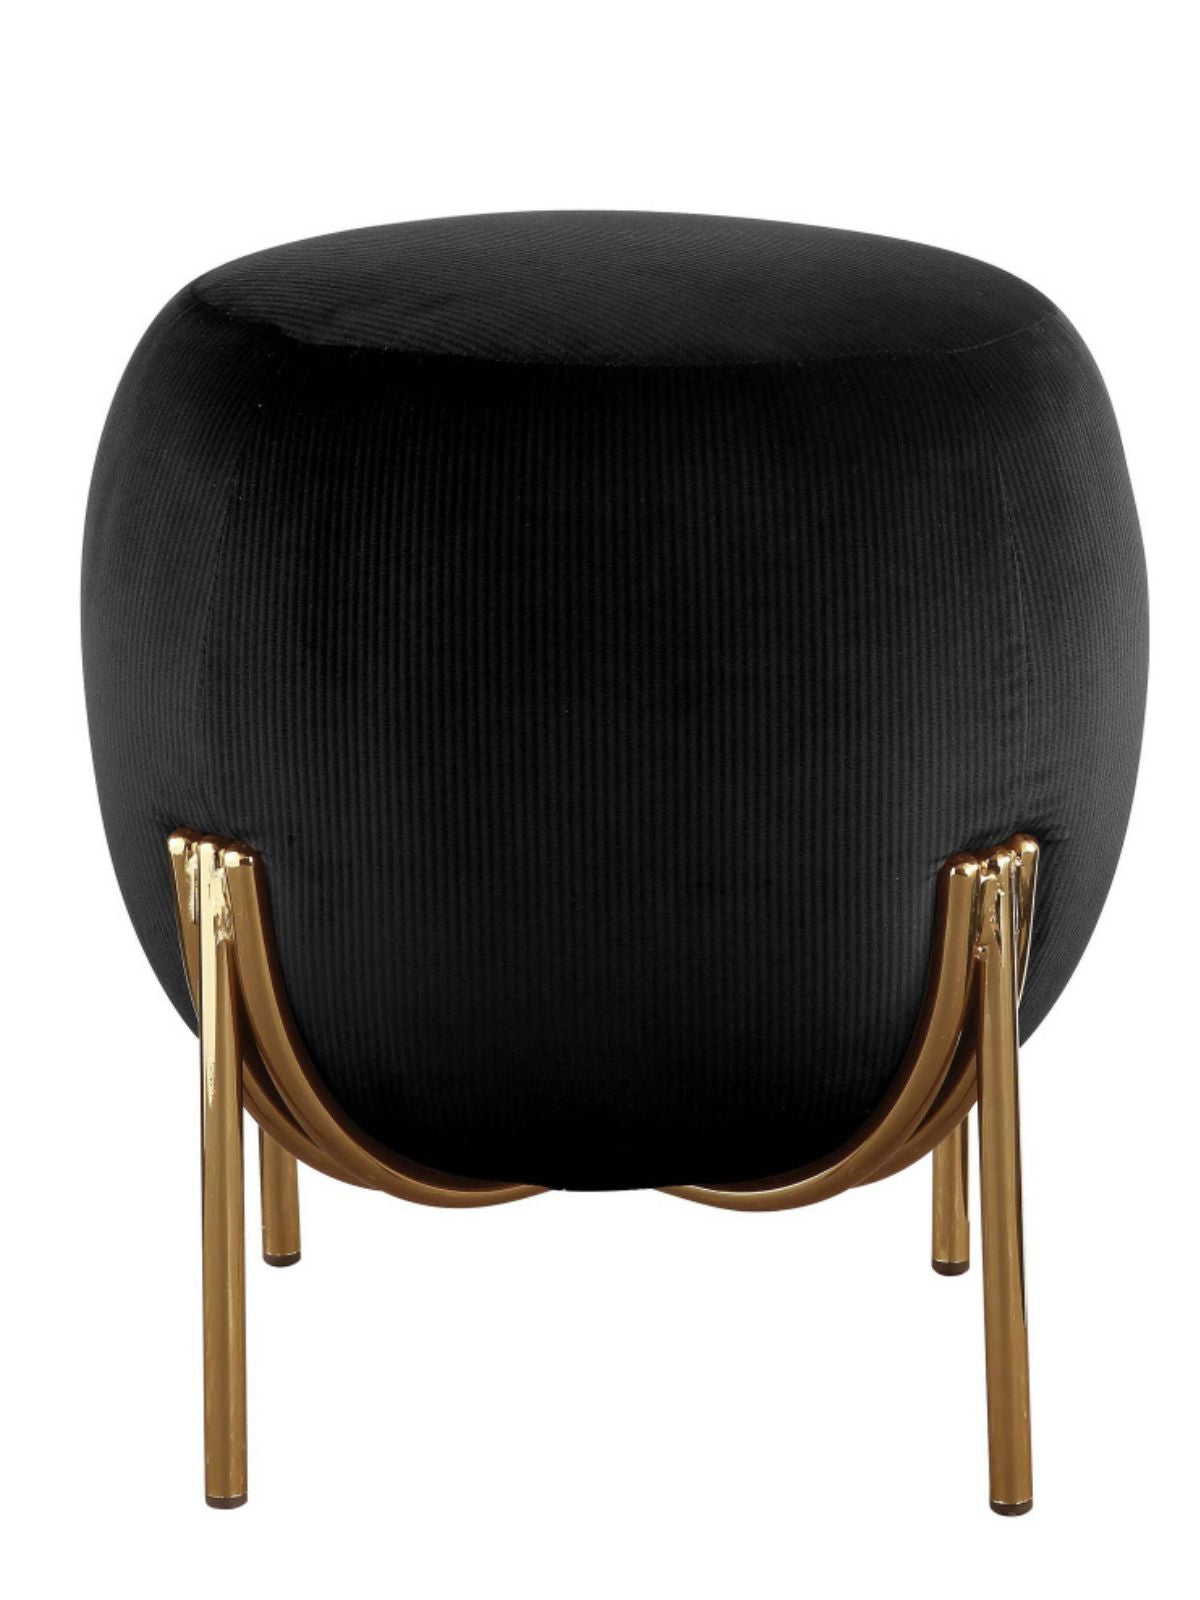 The Sprassi ottoman is ideal to be a footstool or a platform to stack your favorite readings, this round piece is featuring fully padded seat in velvet fabric with metal straight leg.